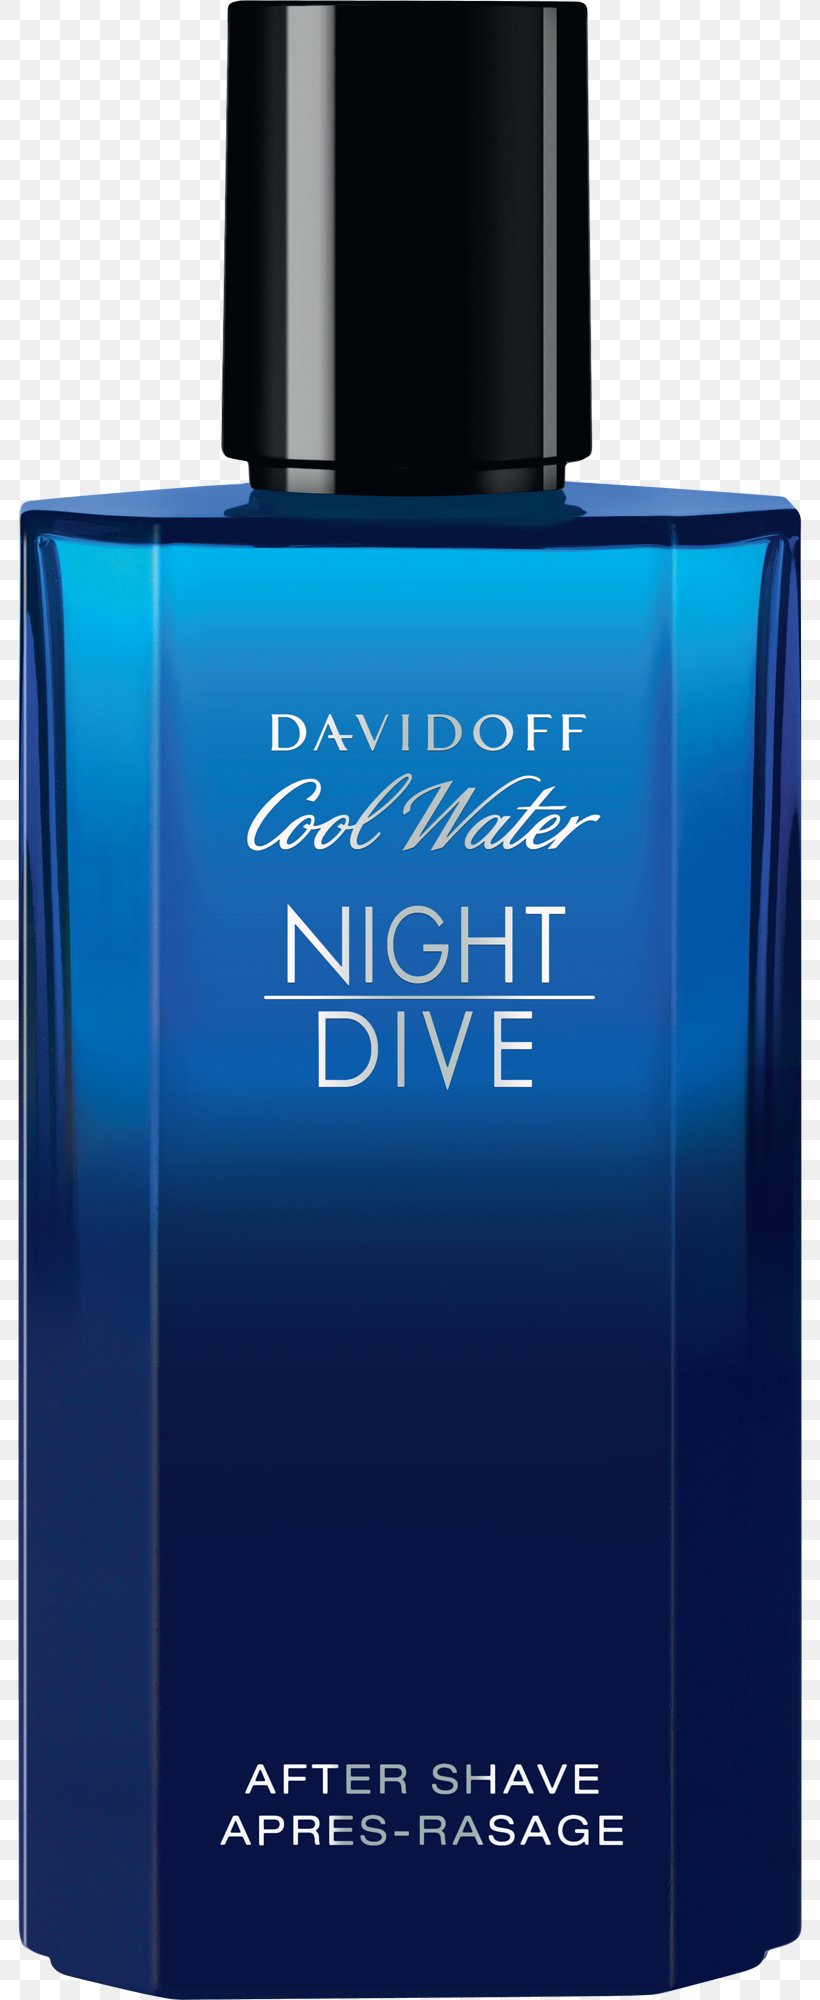 Perfume Lotion Cool Water Aftershave Davidoff, PNG, 784x2000px, Perfume, Aftershave, Cool Water, Cosmetics, Davidoff Download Free